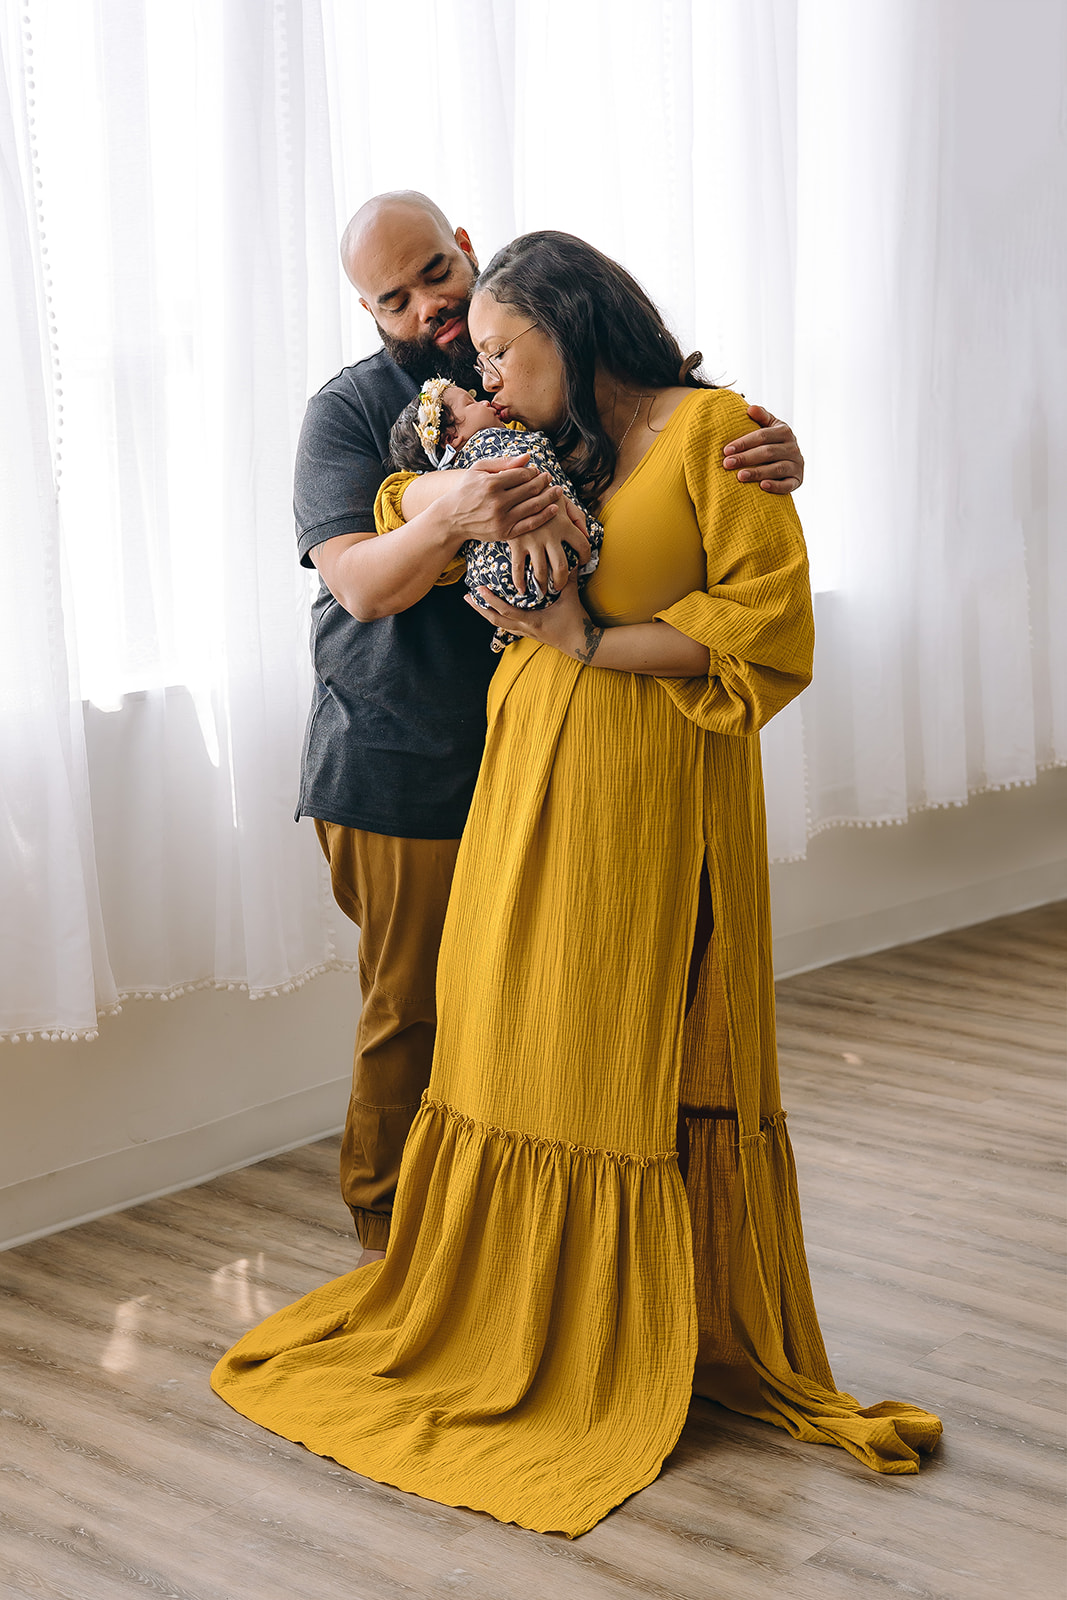 A heartwarming portrait of a family in a cozy studio setting. The father, with a closely shaved head and beard, dressed in a grey T-shirt and mustard trousers, tenderly embraces his partner and their newborn. The mother, wearing glasses, a long mustard dress with puffed sleeves, cradles the swaddled baby lovingly in her arms. She is standing and smiling down at the infant. A sense of peaceful joy permeates the room with sheer curtains softly diffusing the daylight.